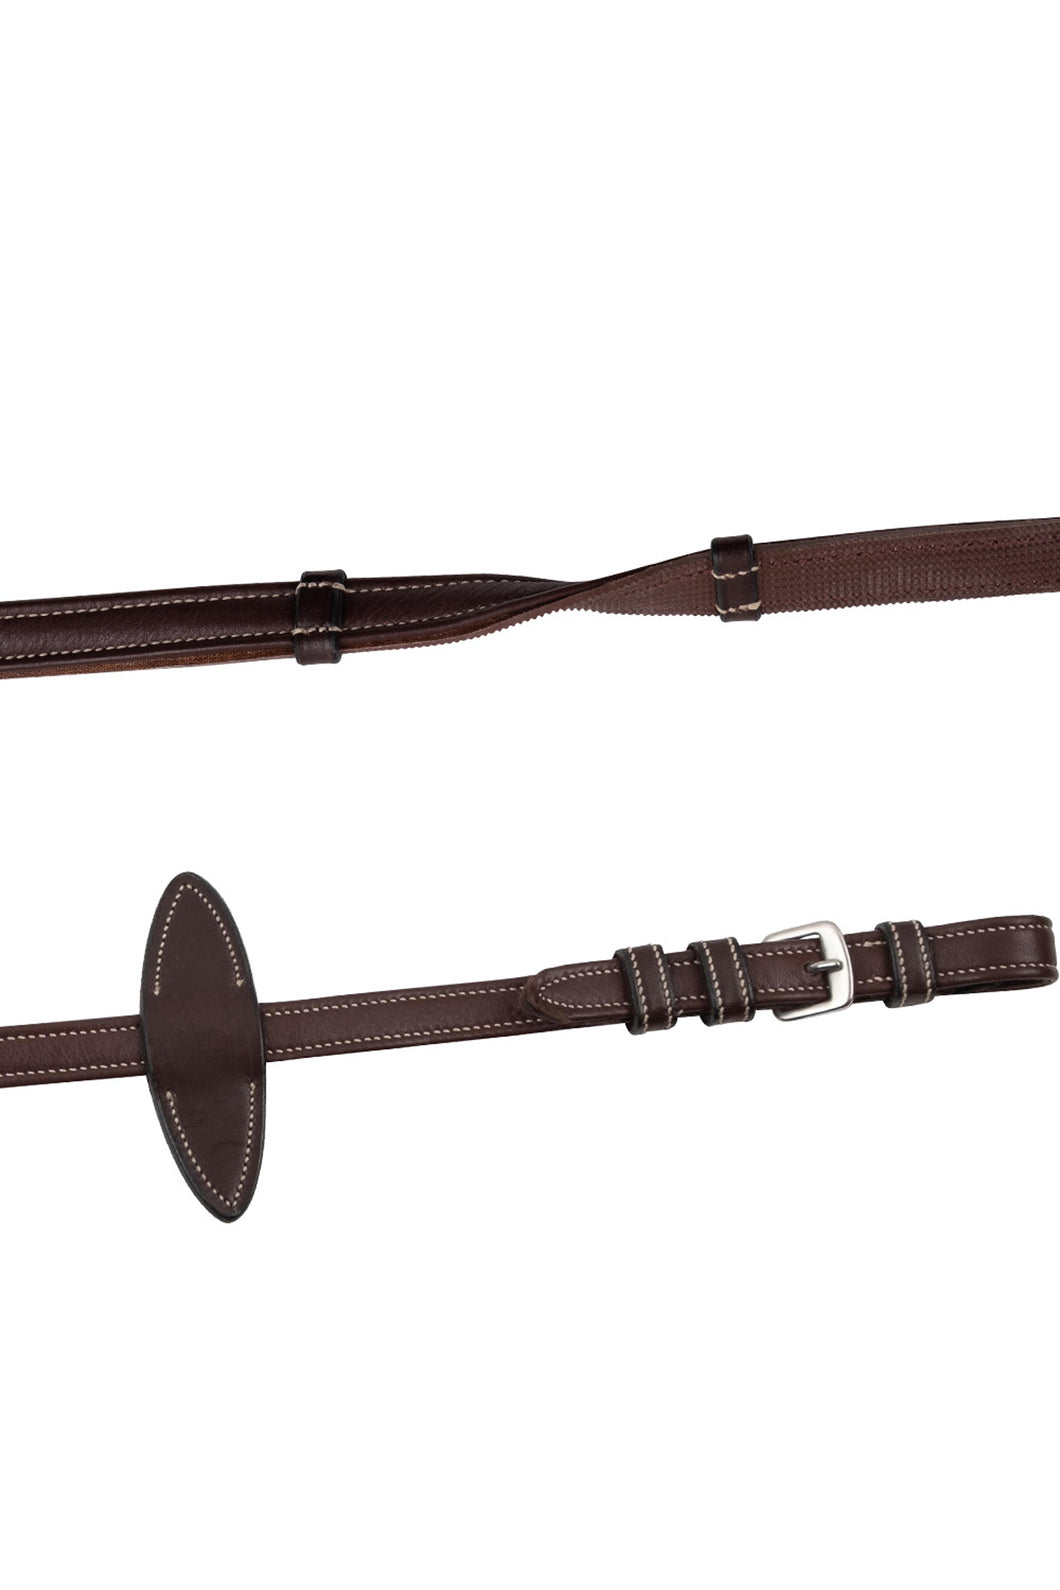 Grip Leather/Rubber Reins - Brown/Cream with Buckles